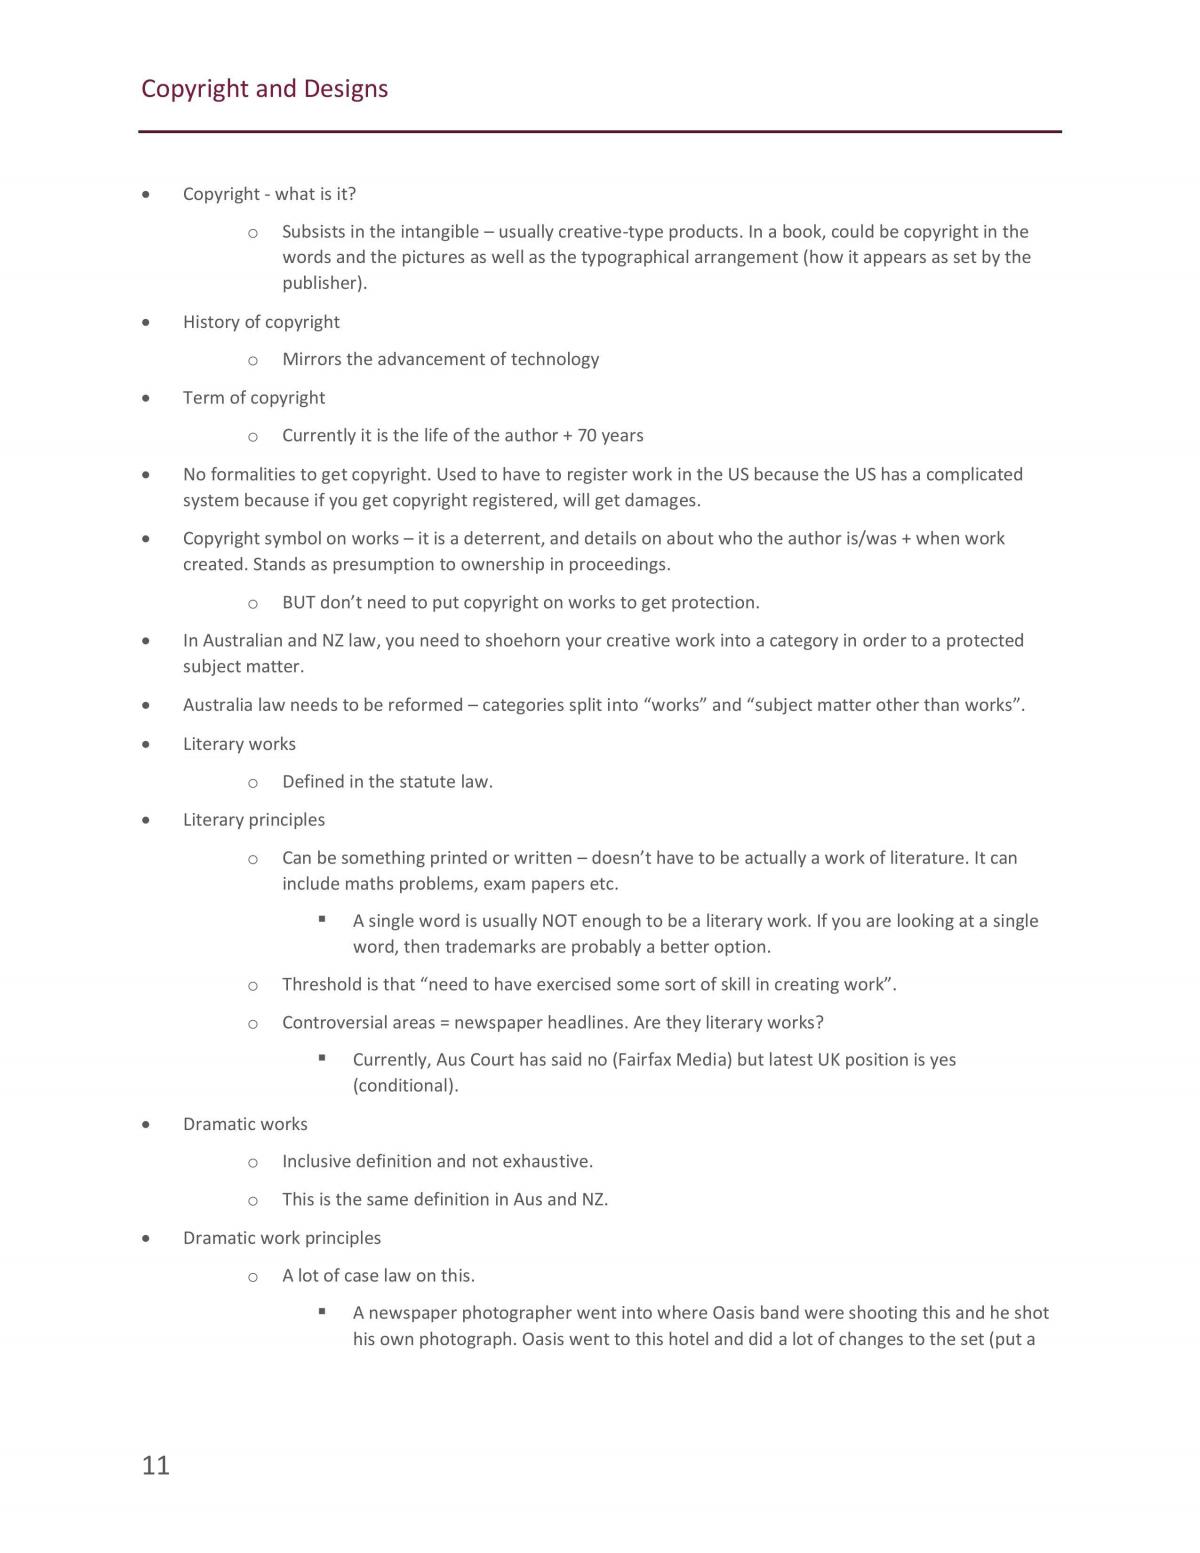 Full Notes - Fundamentals Of IP - Page 11